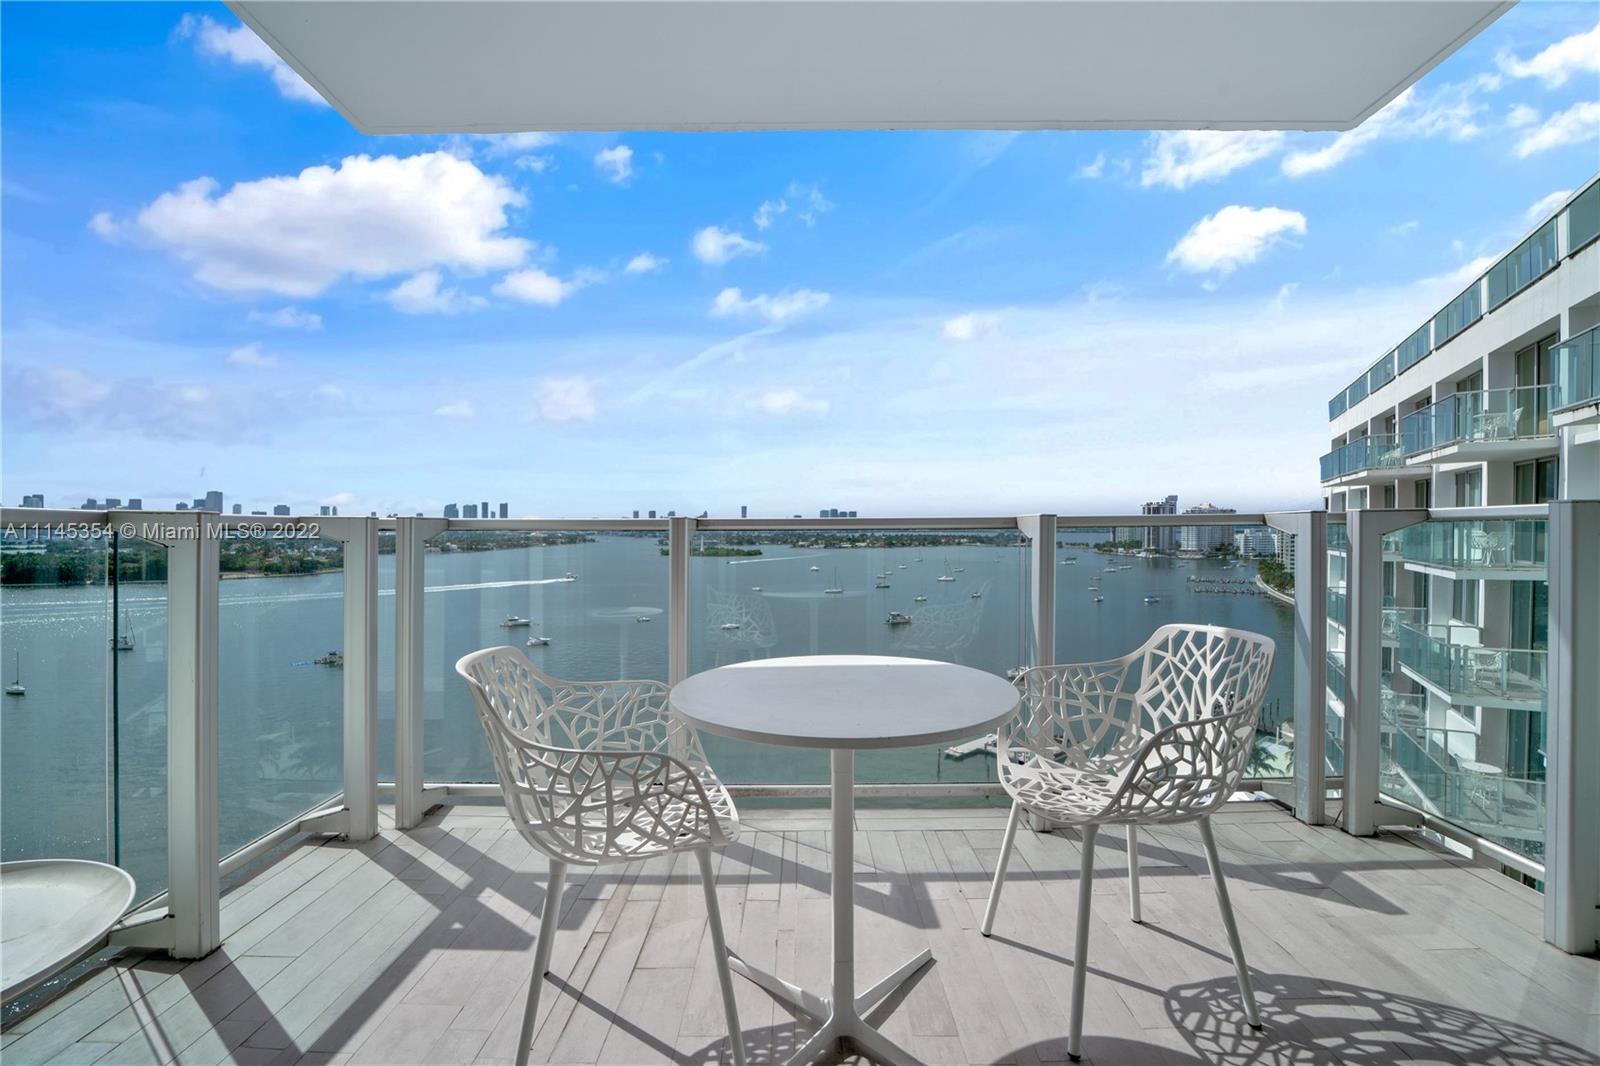 Back on the market! Miami's most trendy, 5-star condo-hotels. One of the most desirable units & view